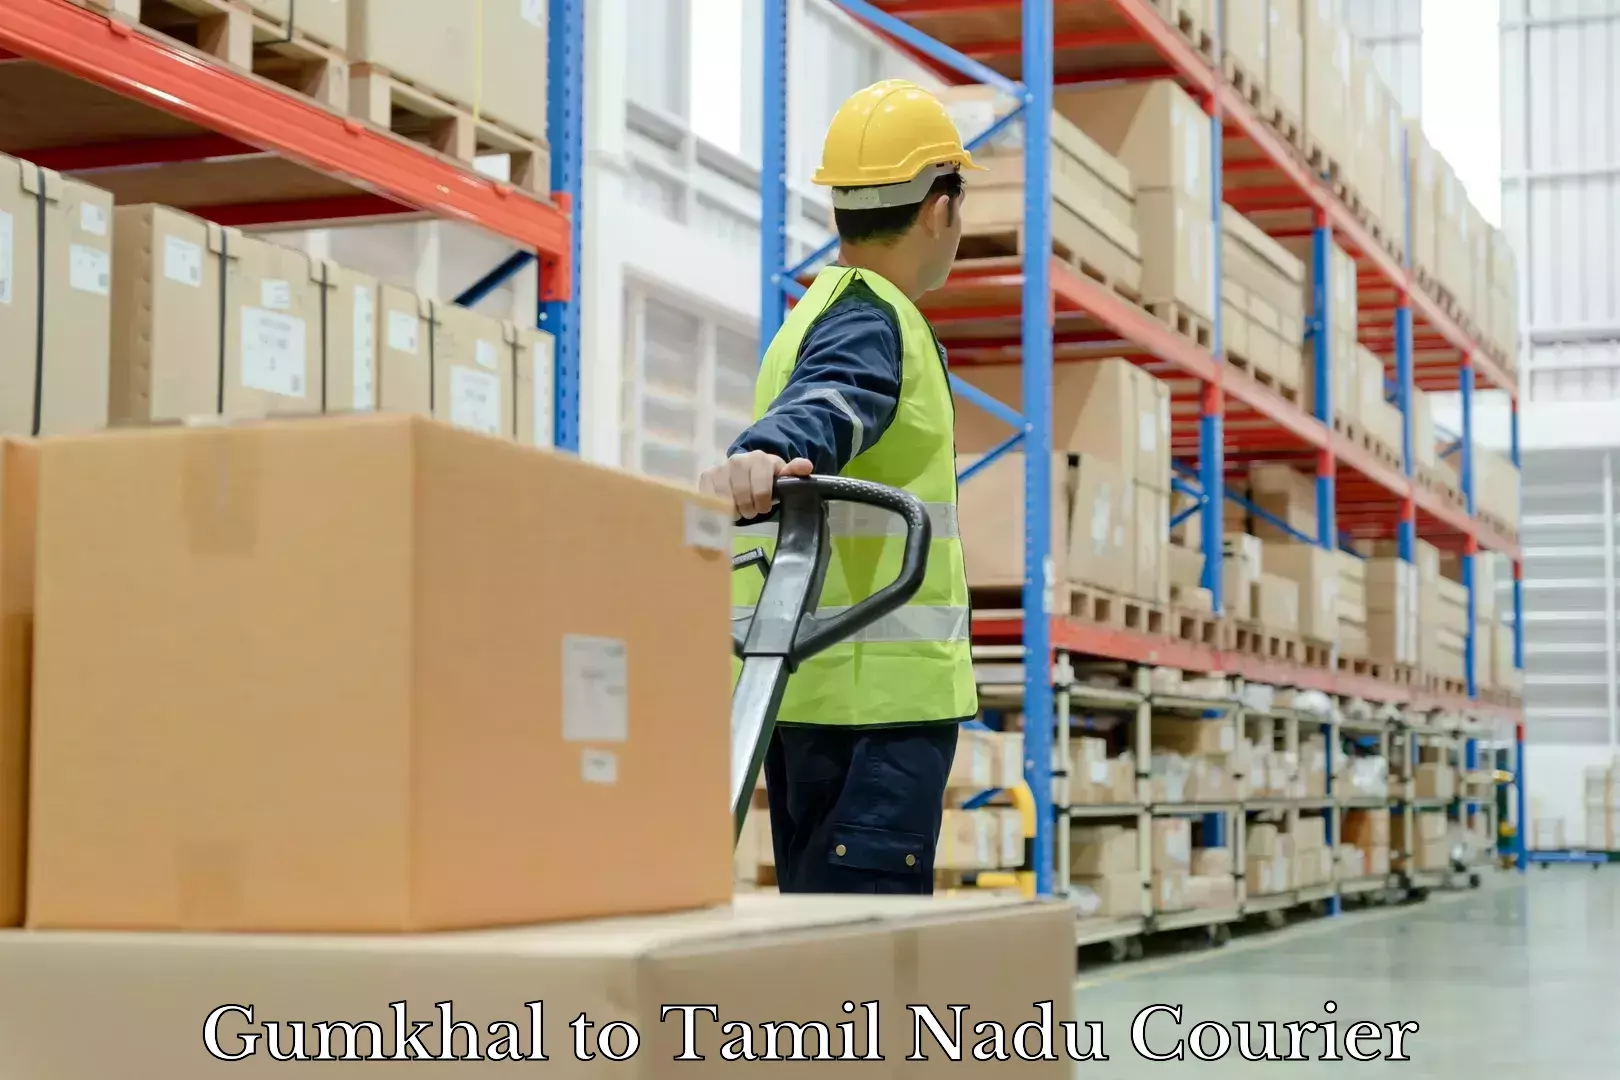 Luggage transport consulting Gumkhal to Chennai Port